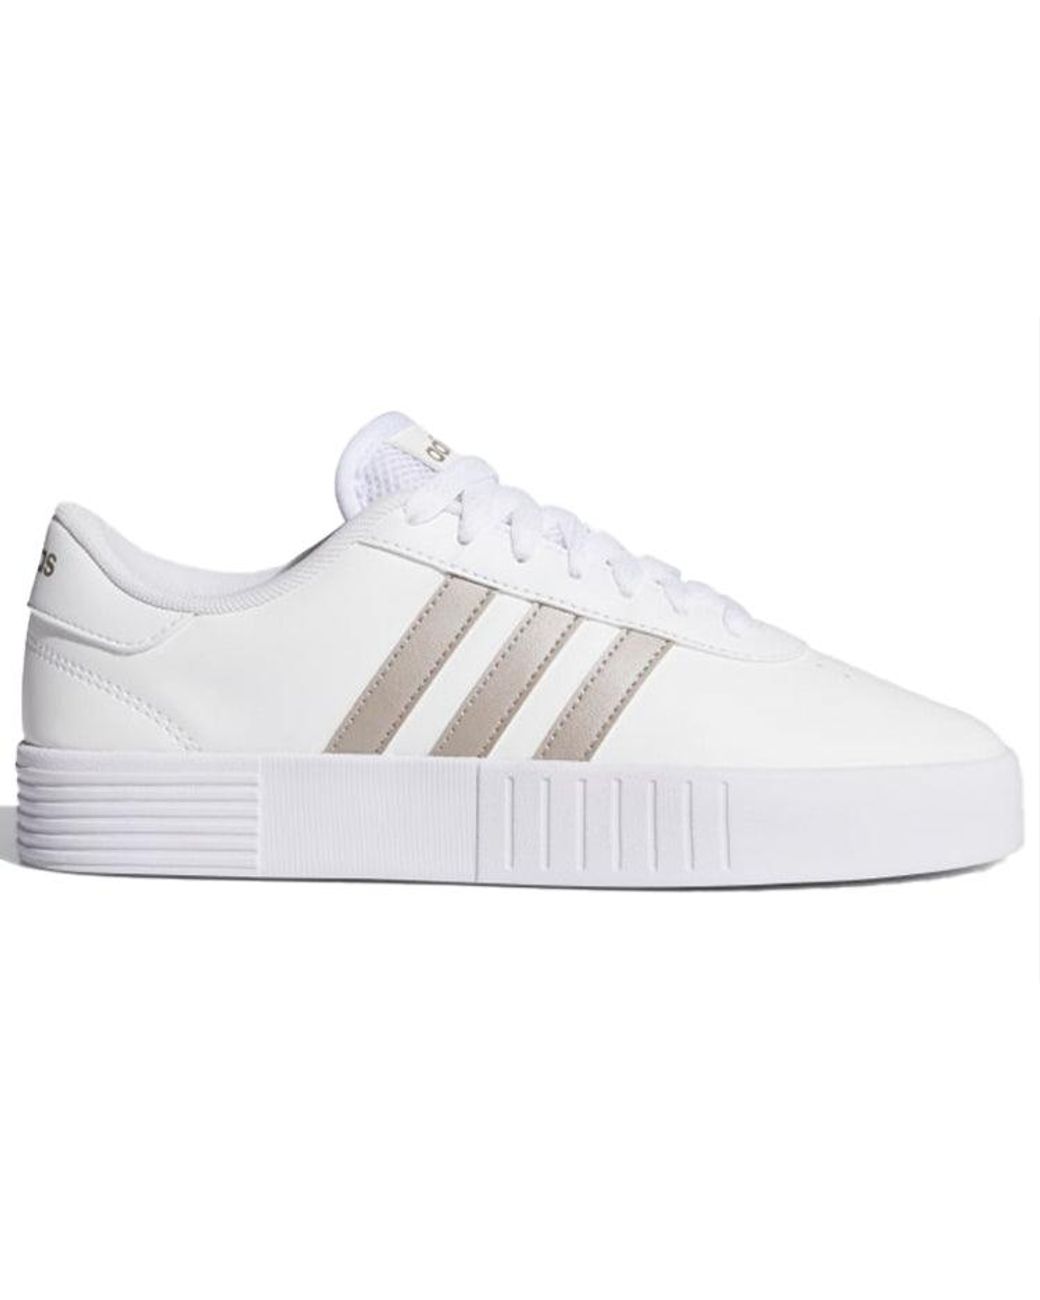 Adidas Neo Court White/coppery | Lyst